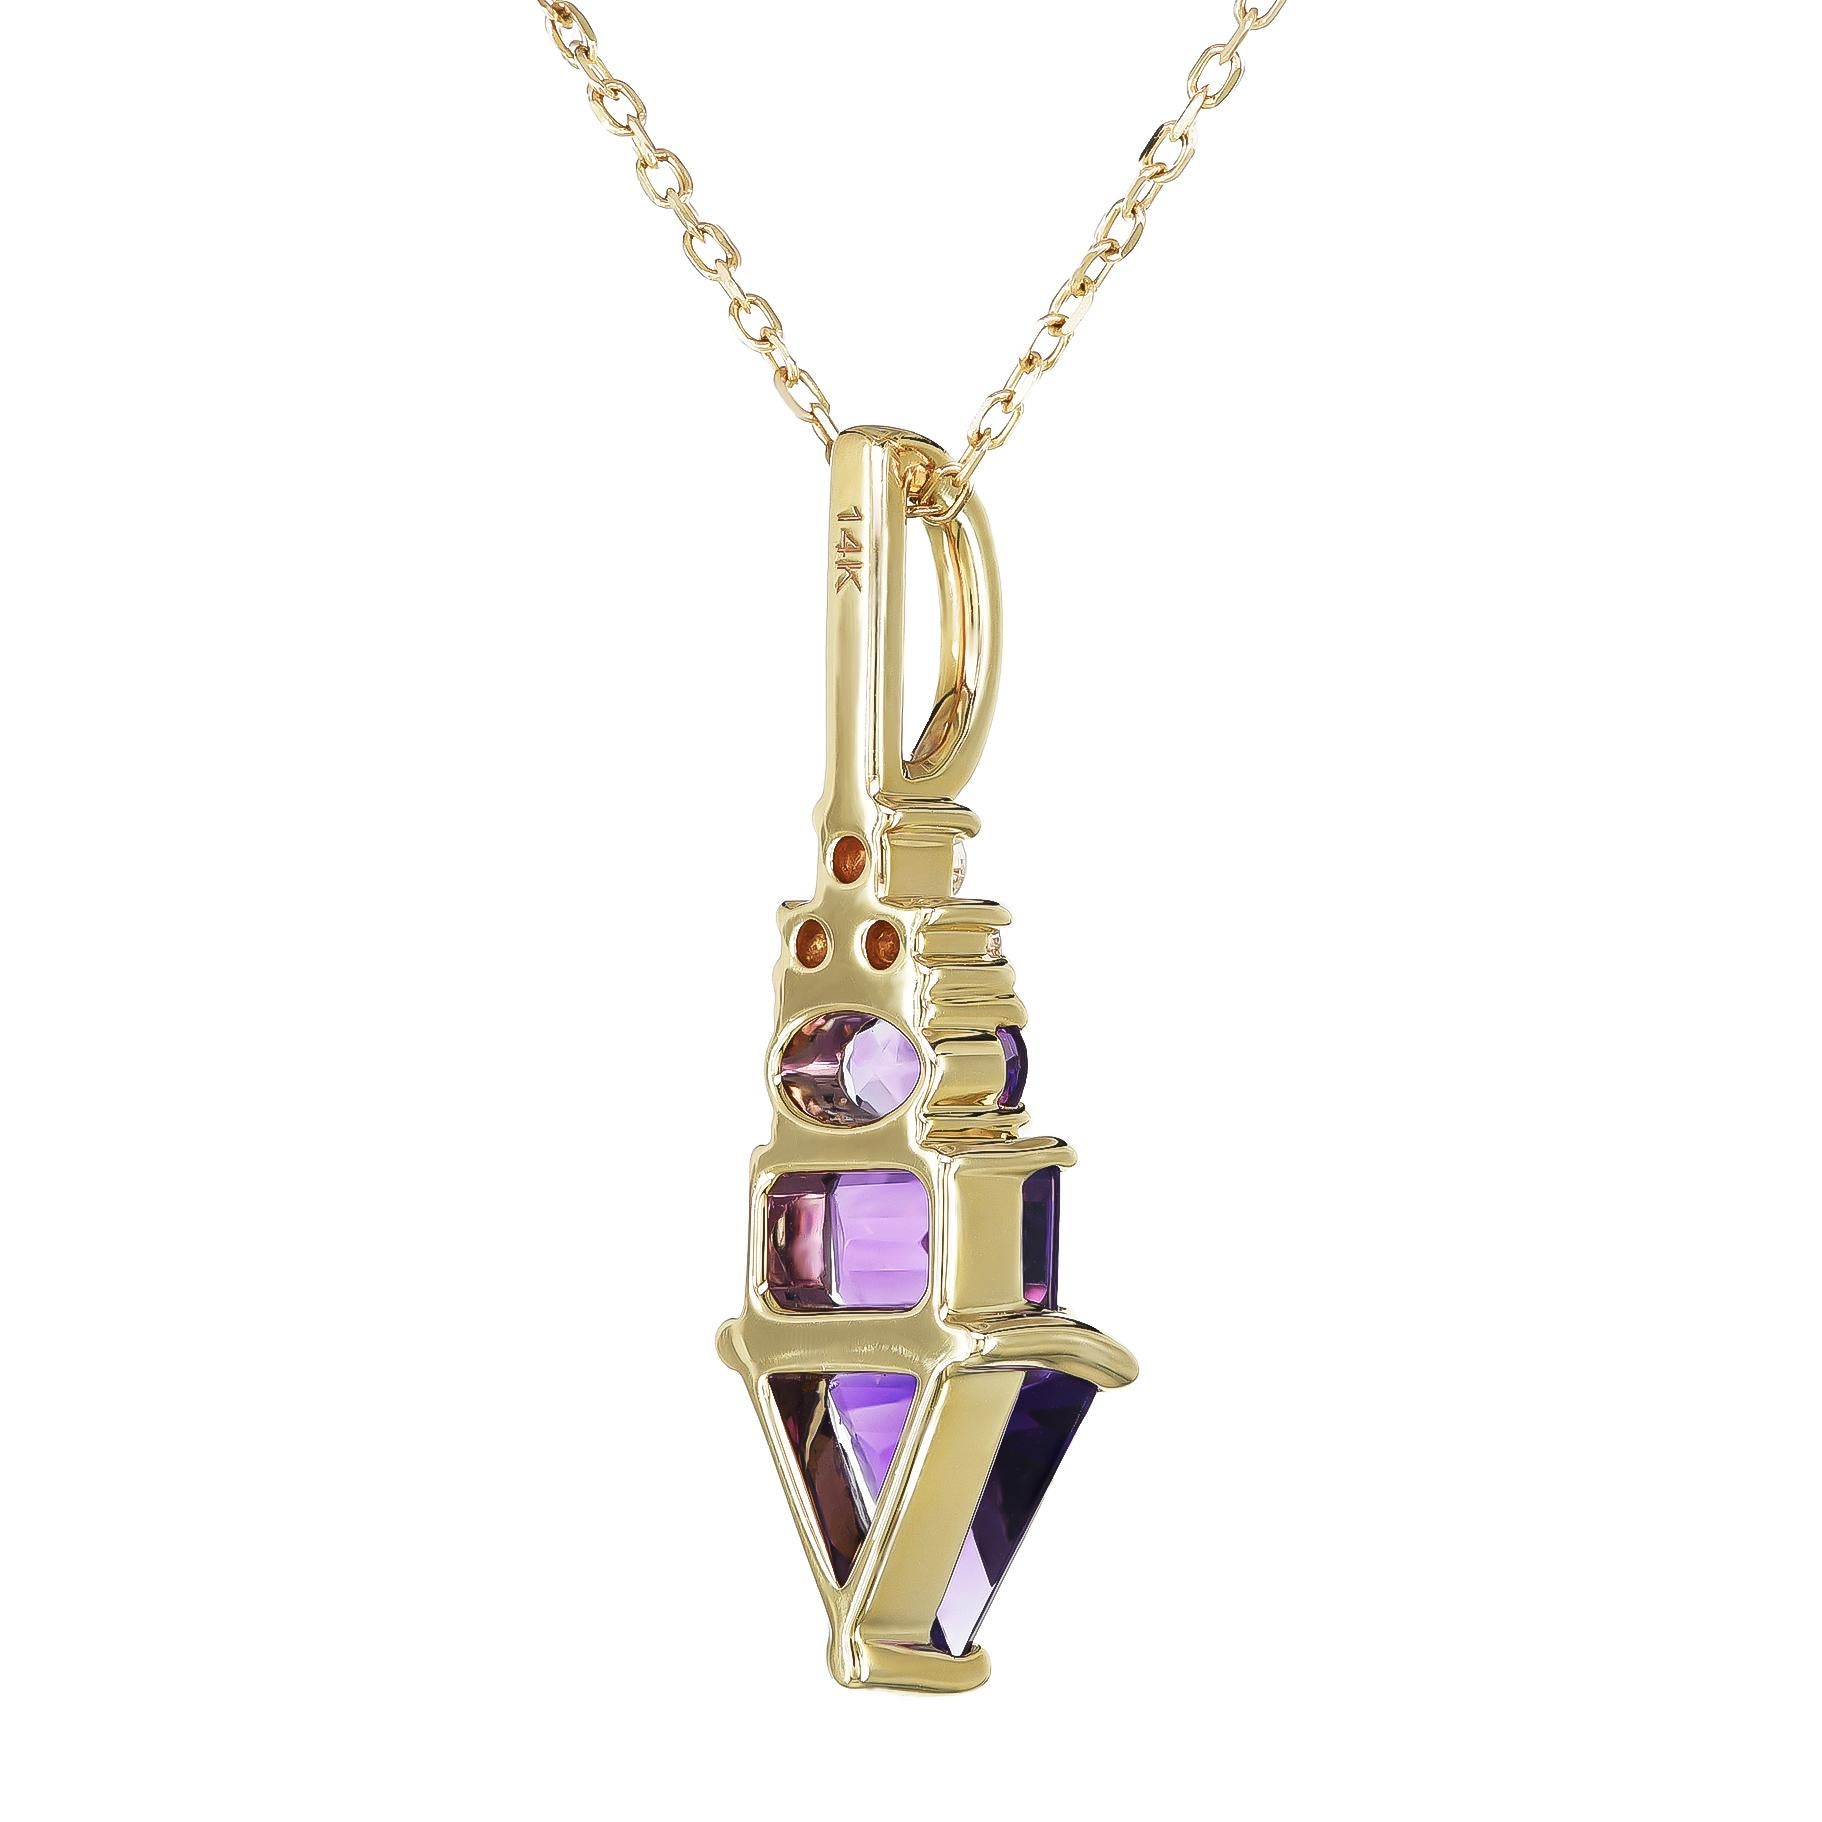 Mixed Cut Pendant with Natural Amethyst 1.41 carats set in 14K Yellow Gold with Diamonds For Sale